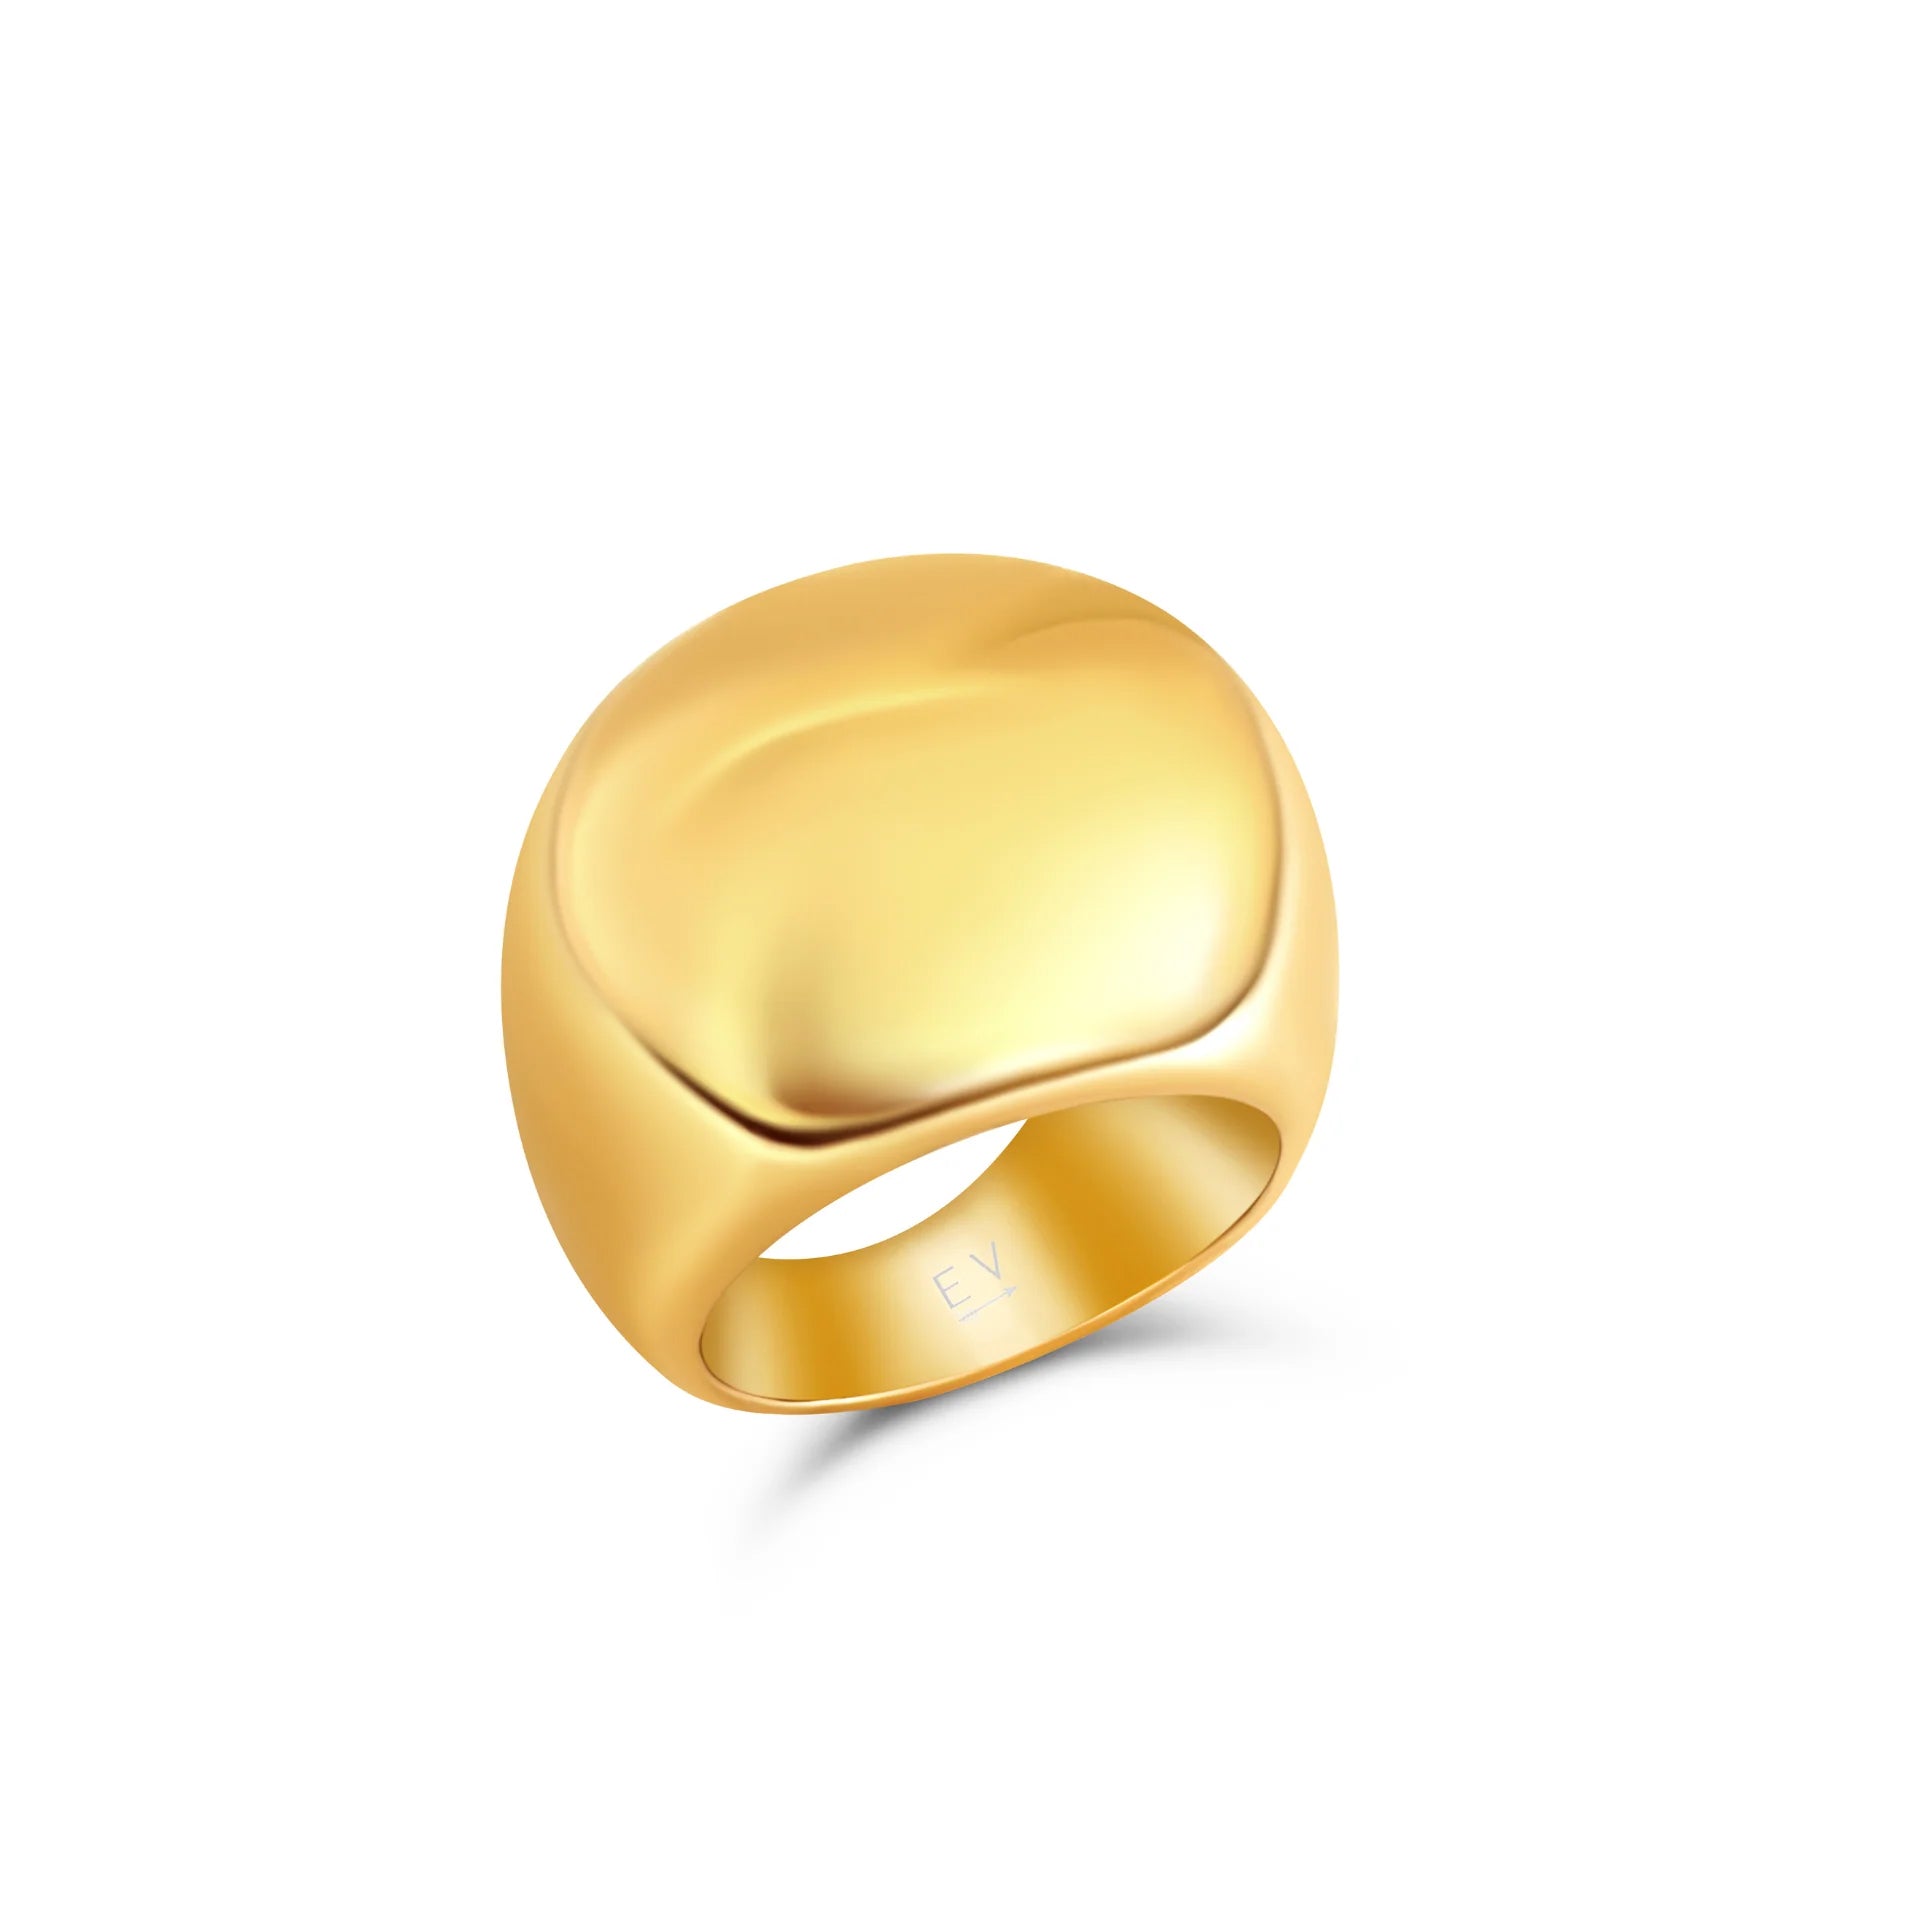 Ellie Vail Oversized Dome Ring Gold 6